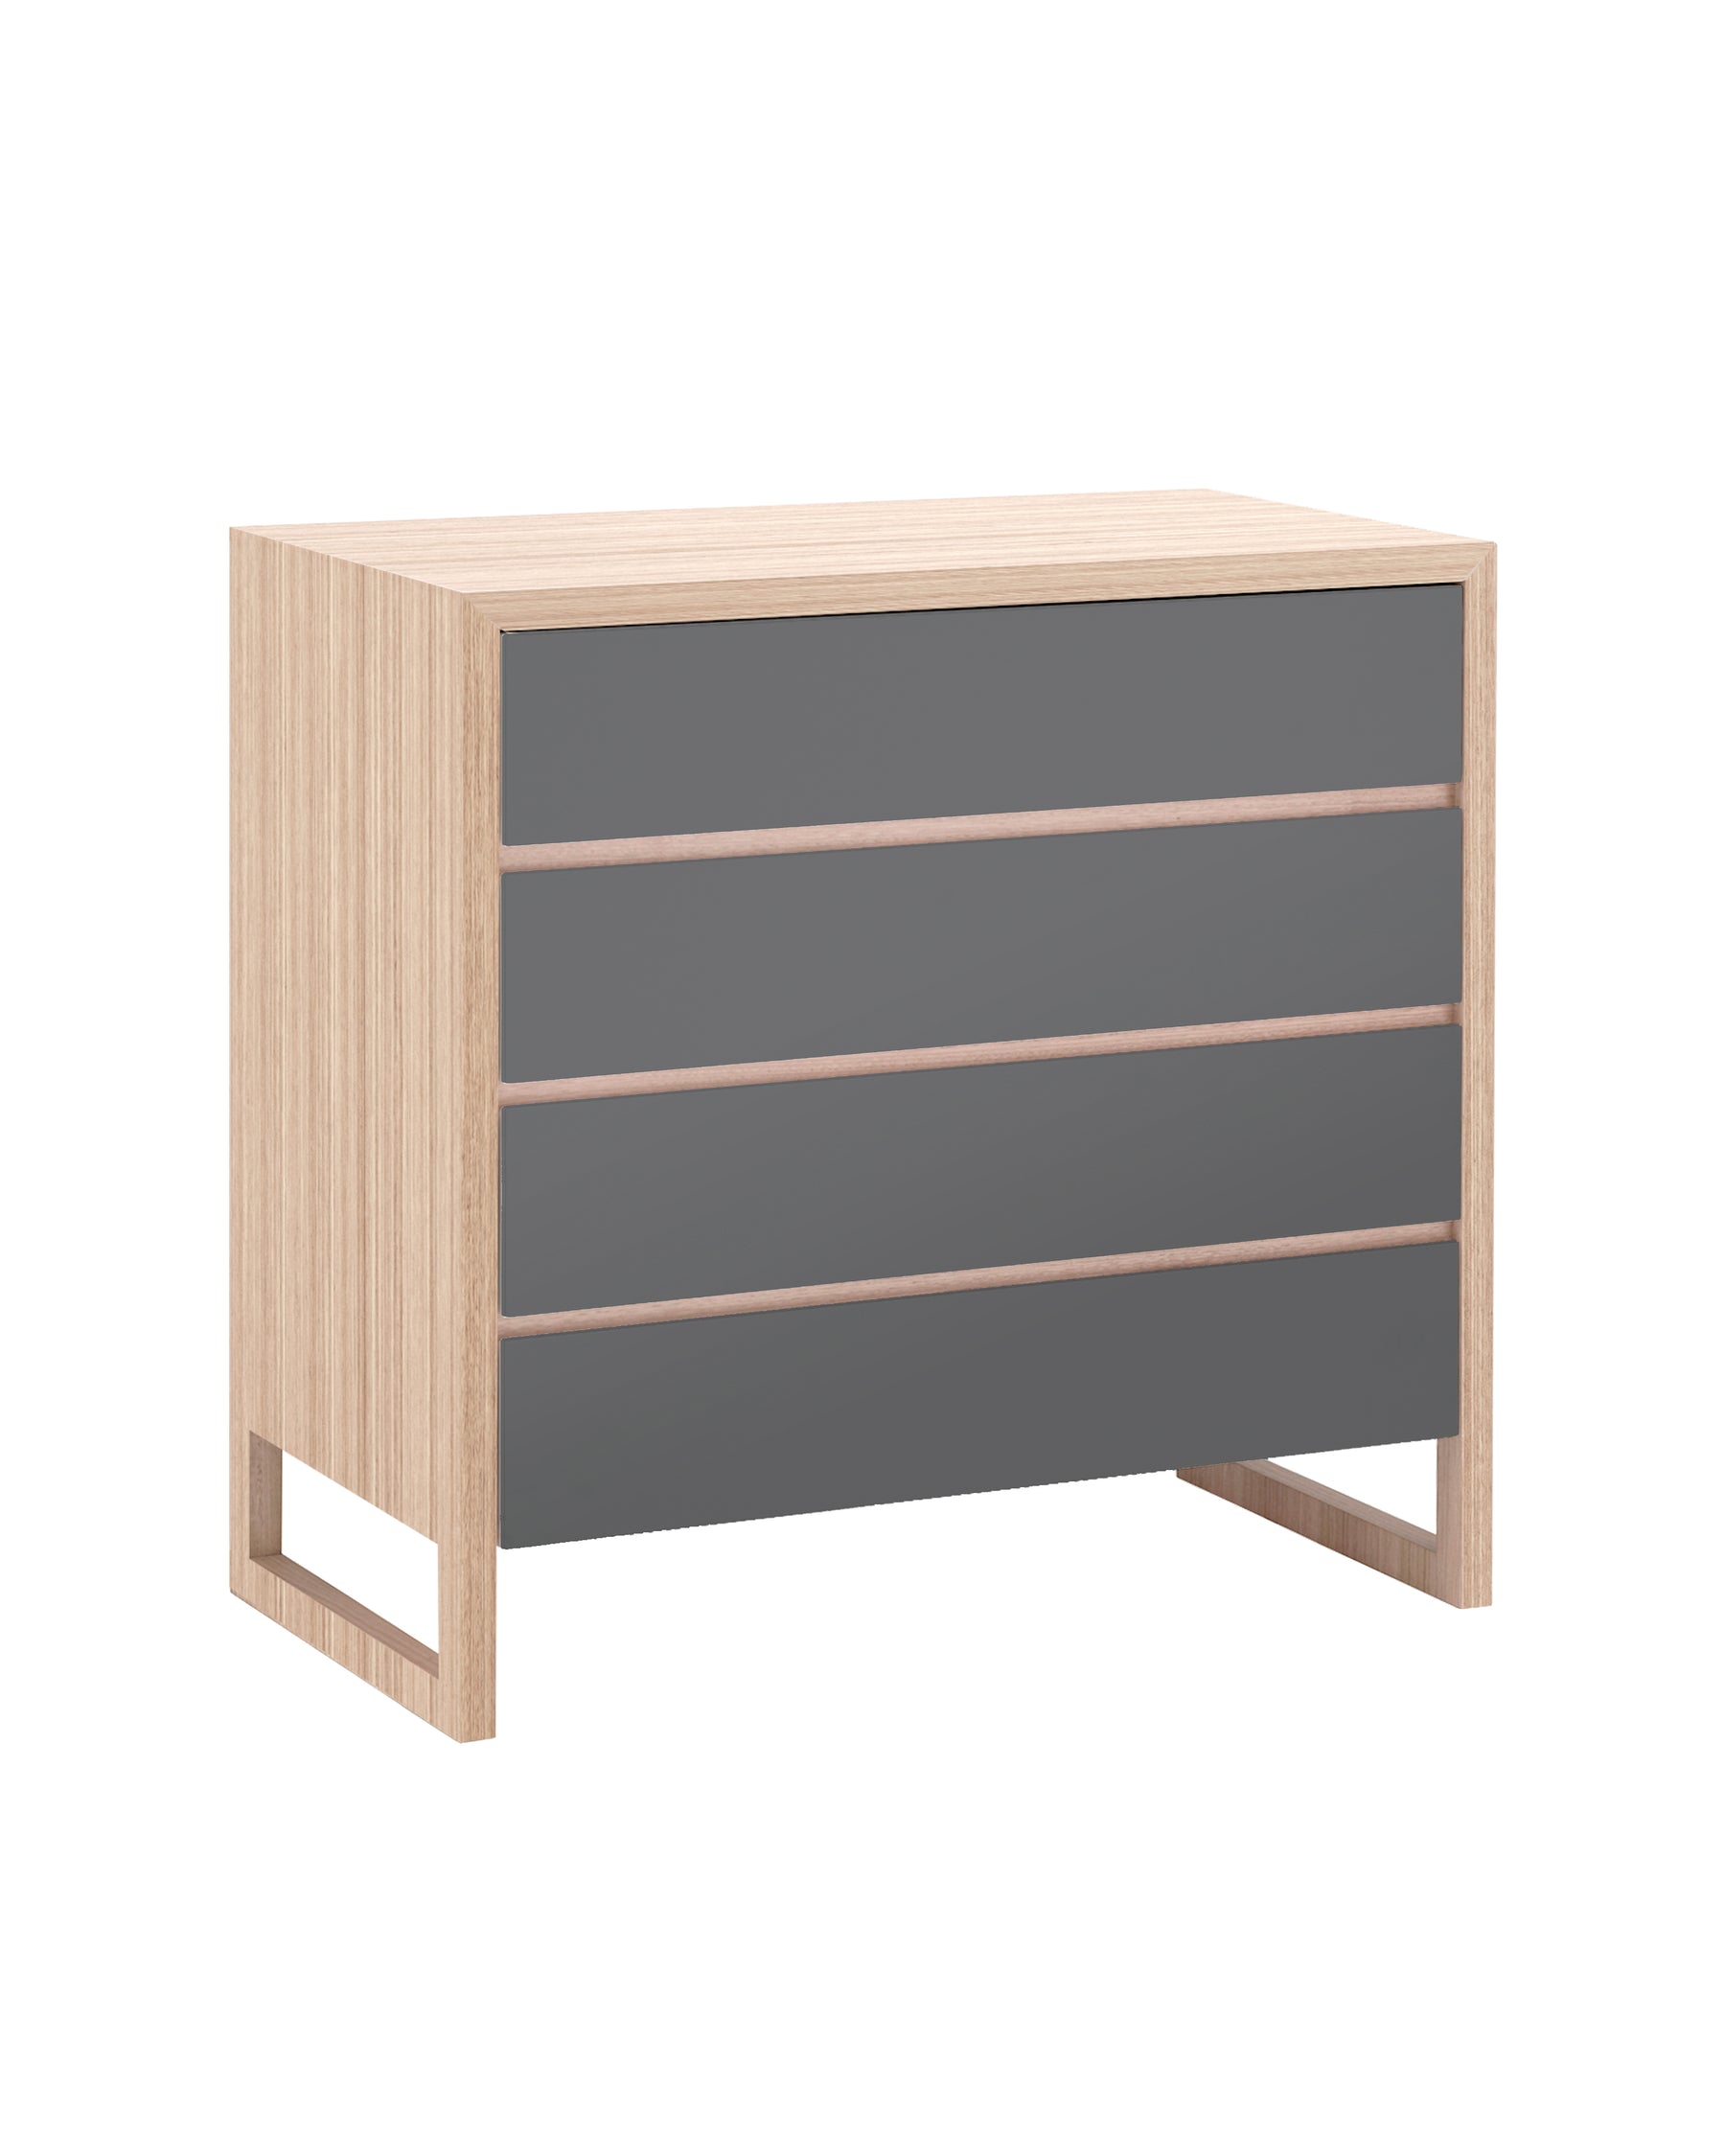 COLOUR BOX CHEST OF DRAWERS | SHOWROOM DISPLAY | PERTH